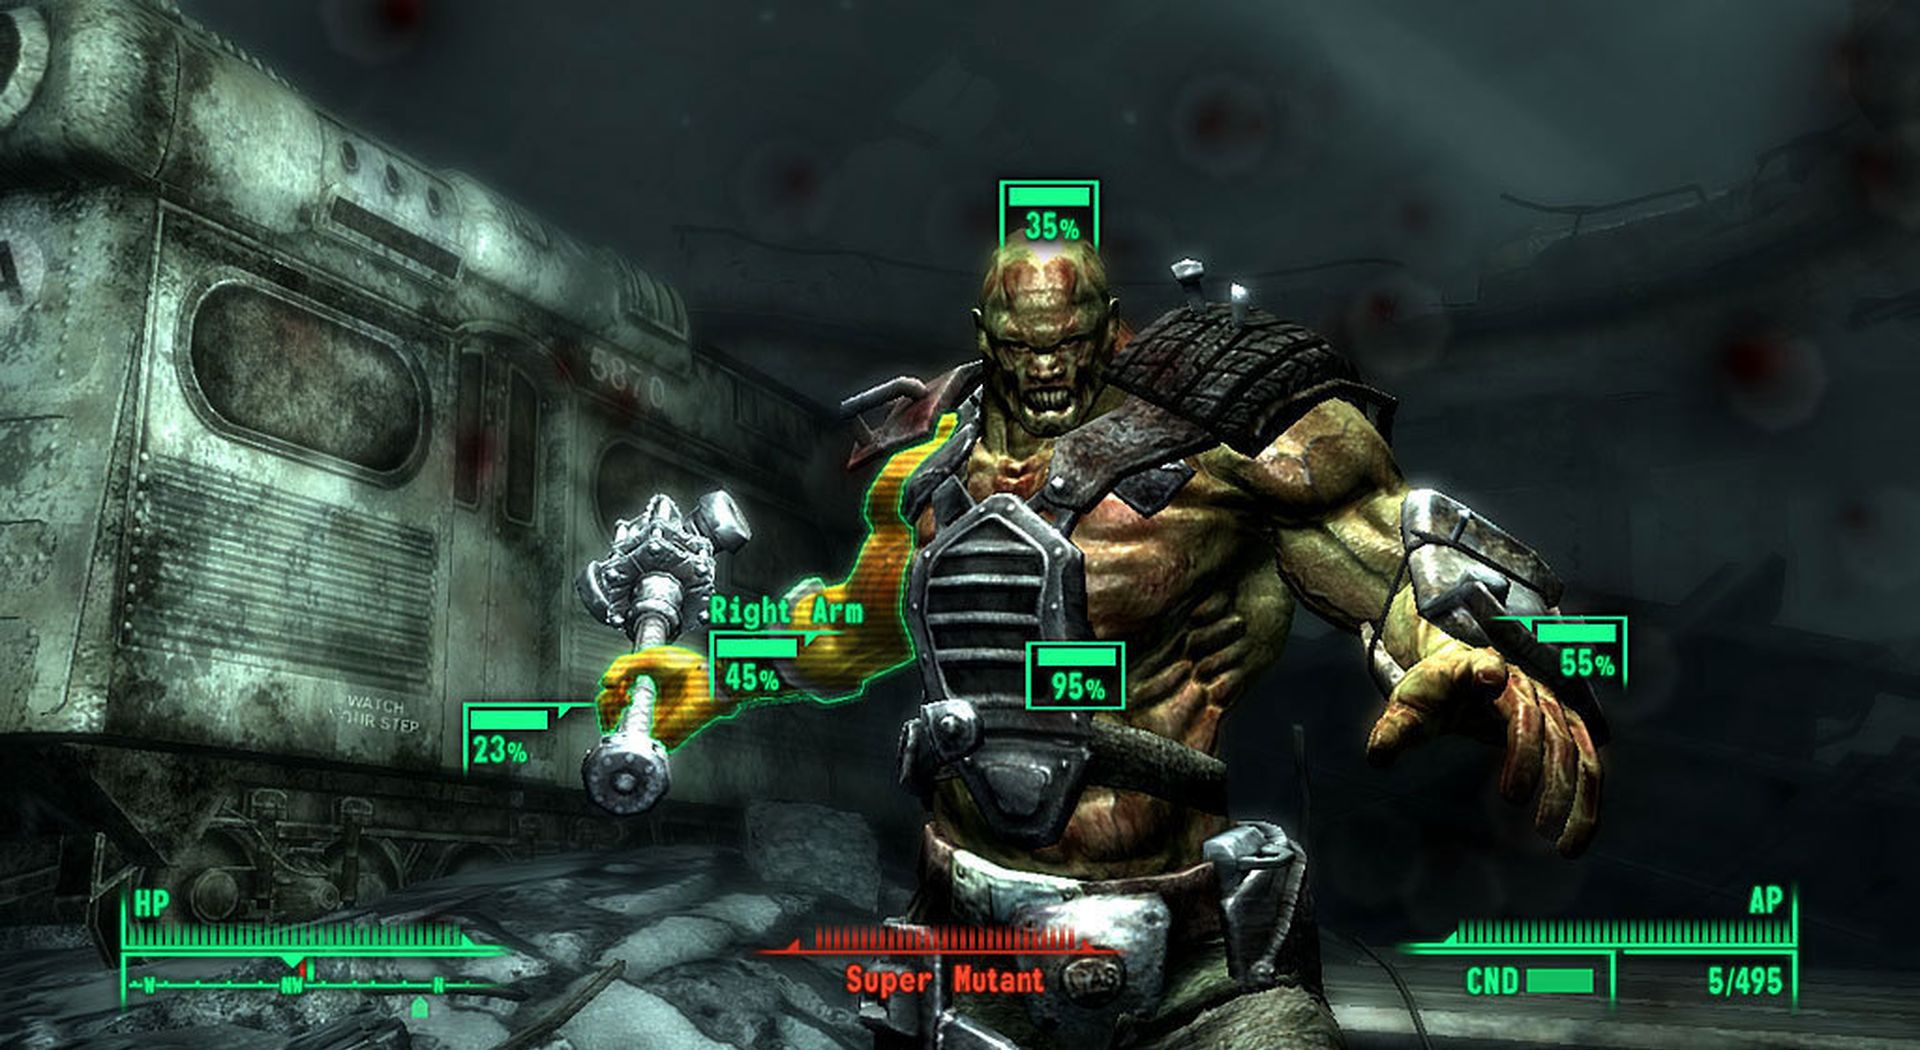 In this article, we are going to be covering how to fix Fallout 3 not launching, which makes Fallout 3 crashes on startup, so you can keep playing this classic game on your PC.